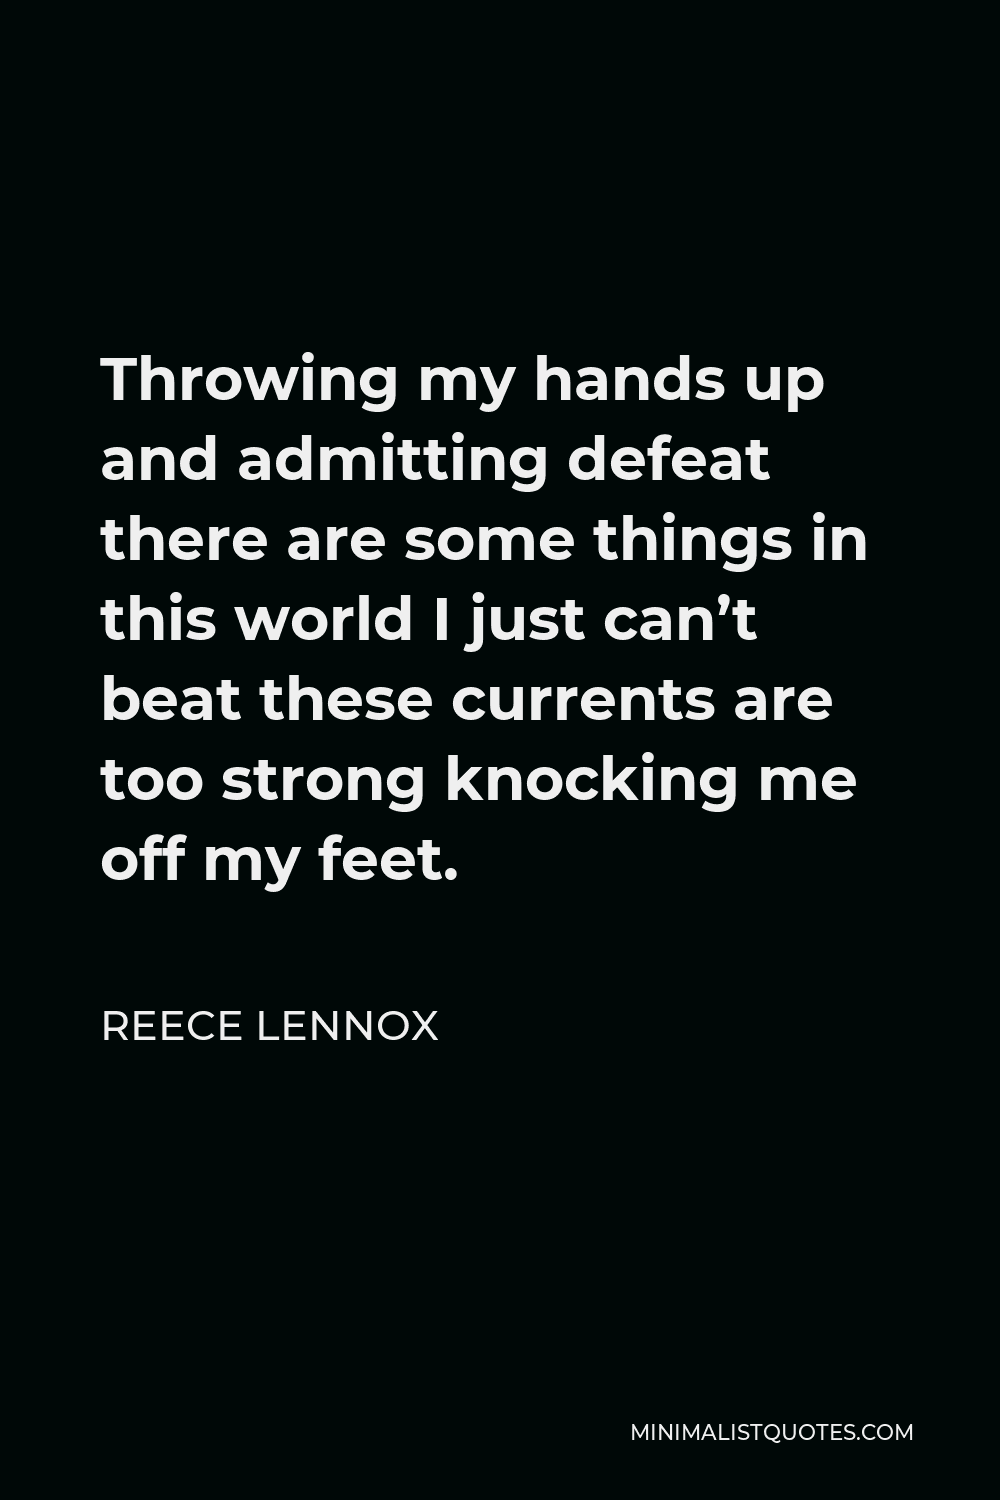 Reece Lennox Quote - Throwing my hands up and admitting defeat there are some things in this world I just can’t beat these currents are too strong knocking me off my feet.